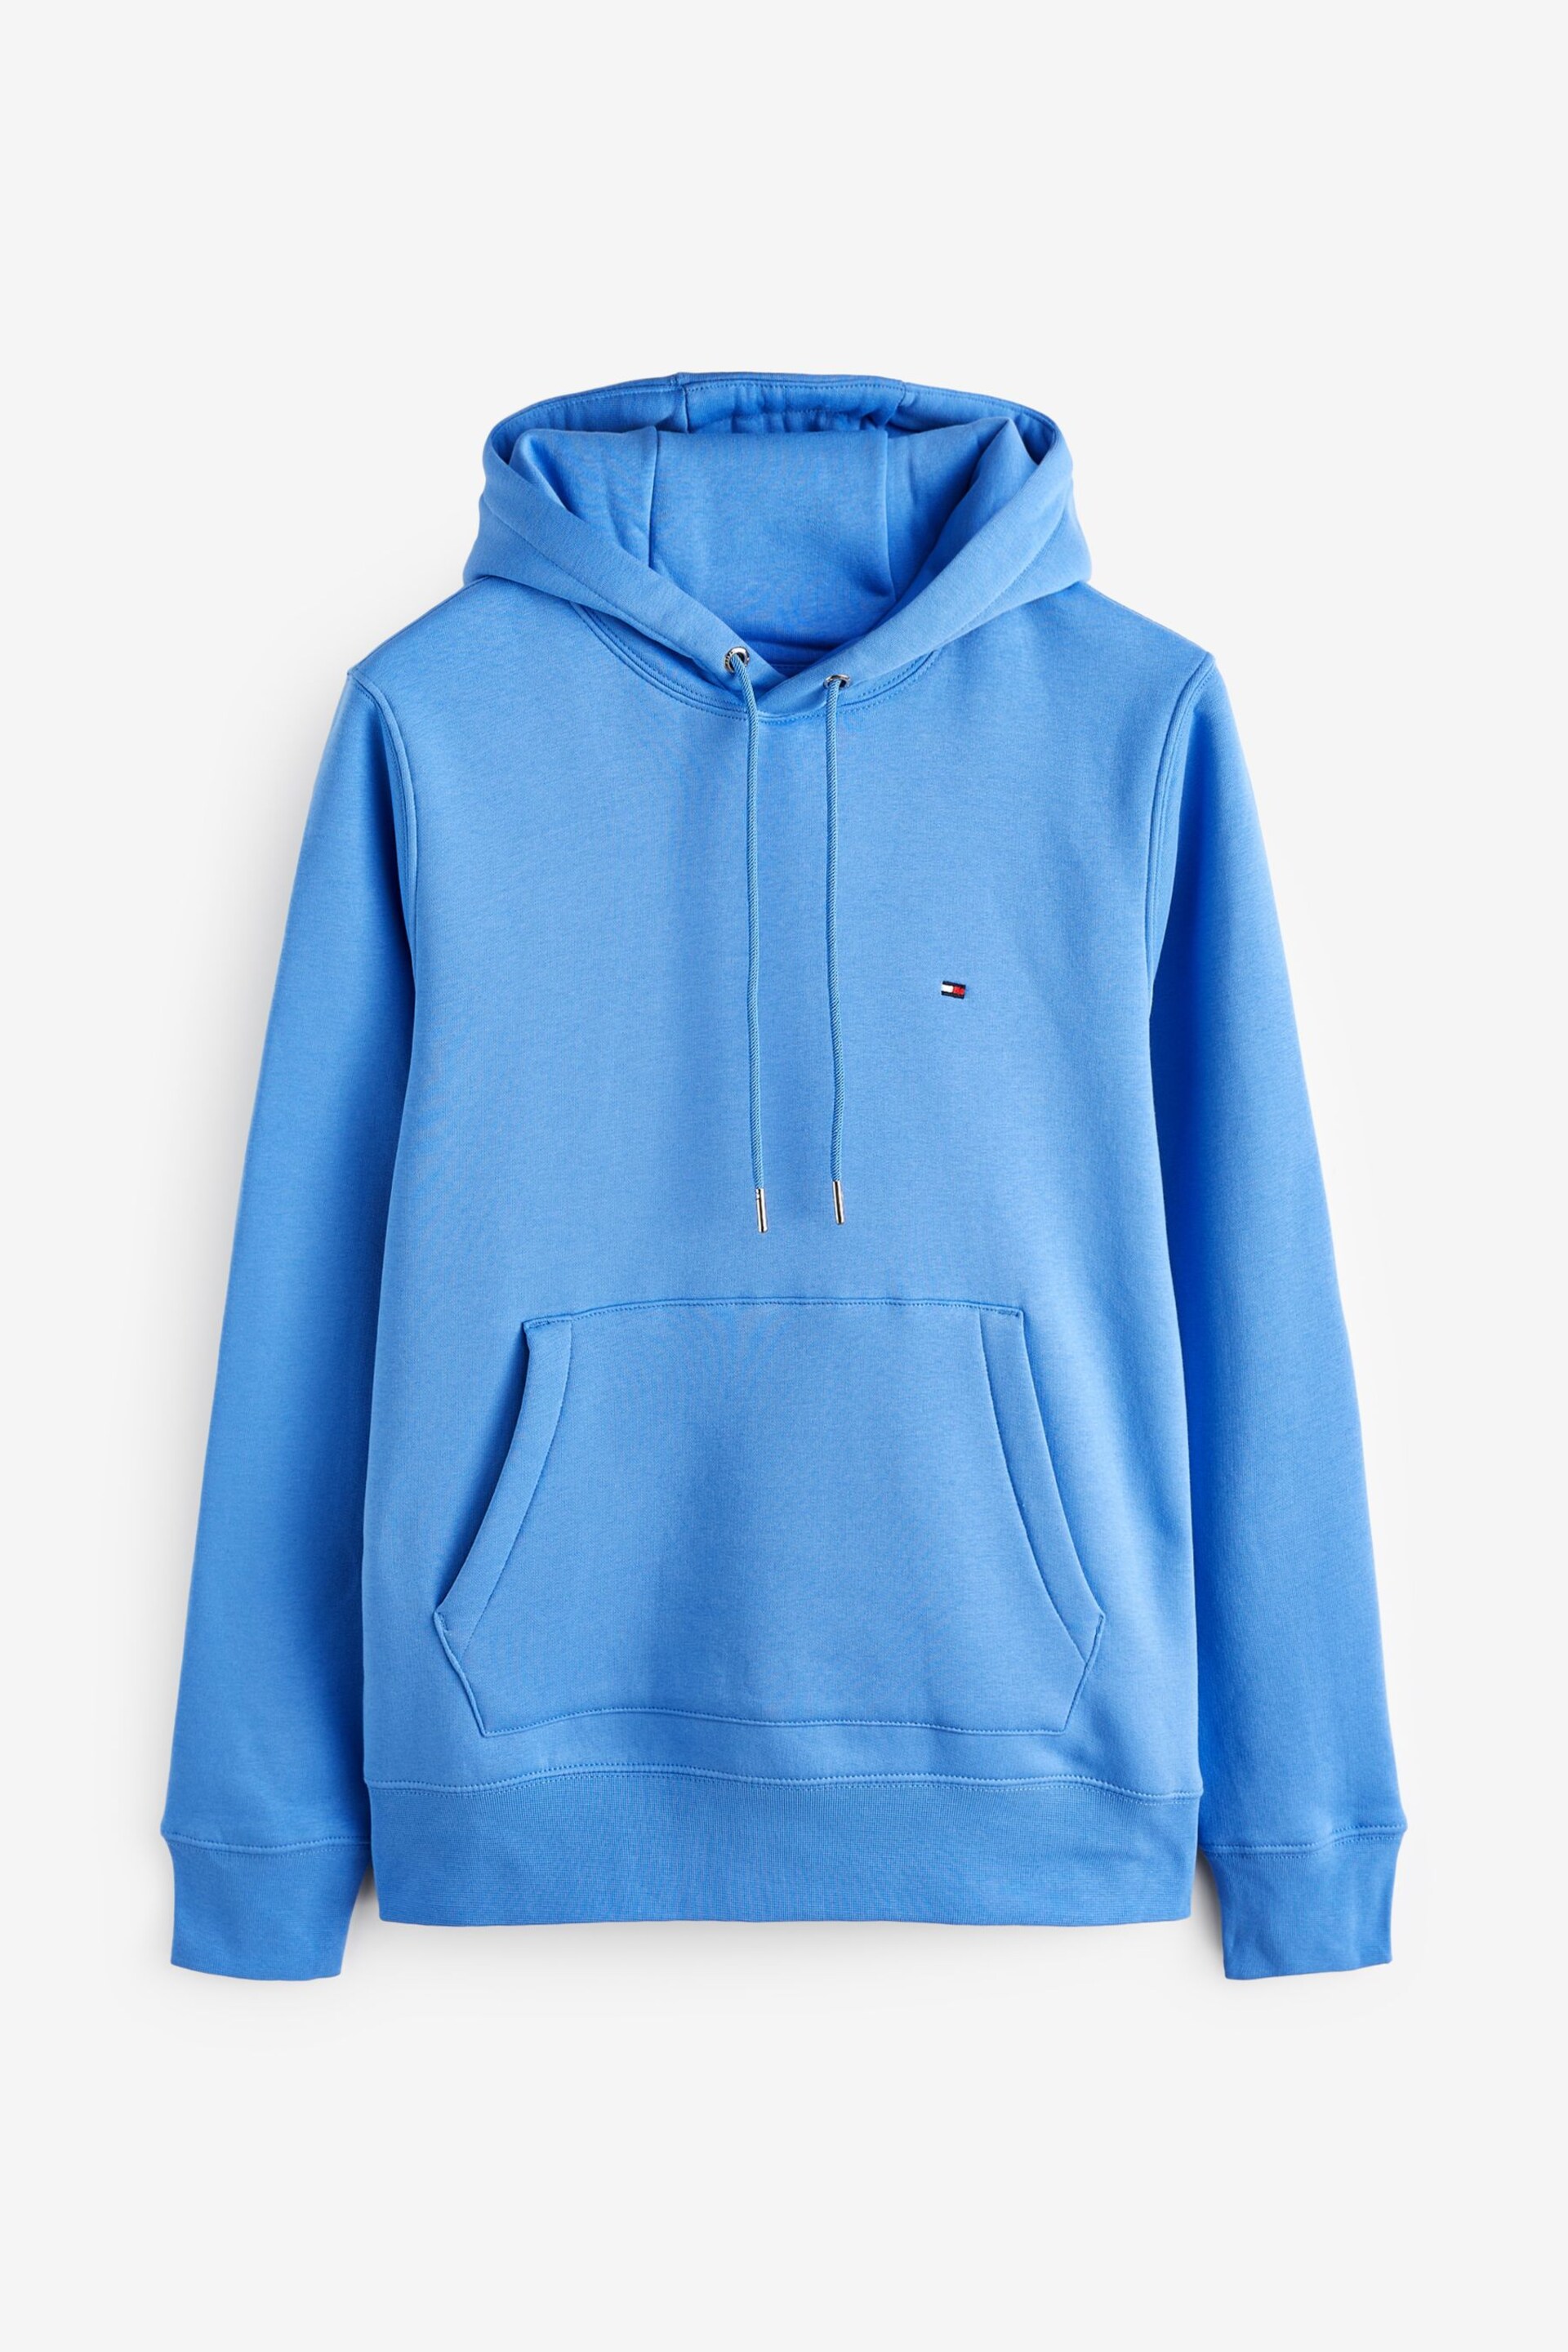 Tommy Hilfiger Natural Classic Flag Hoodie - Image 4 of 4